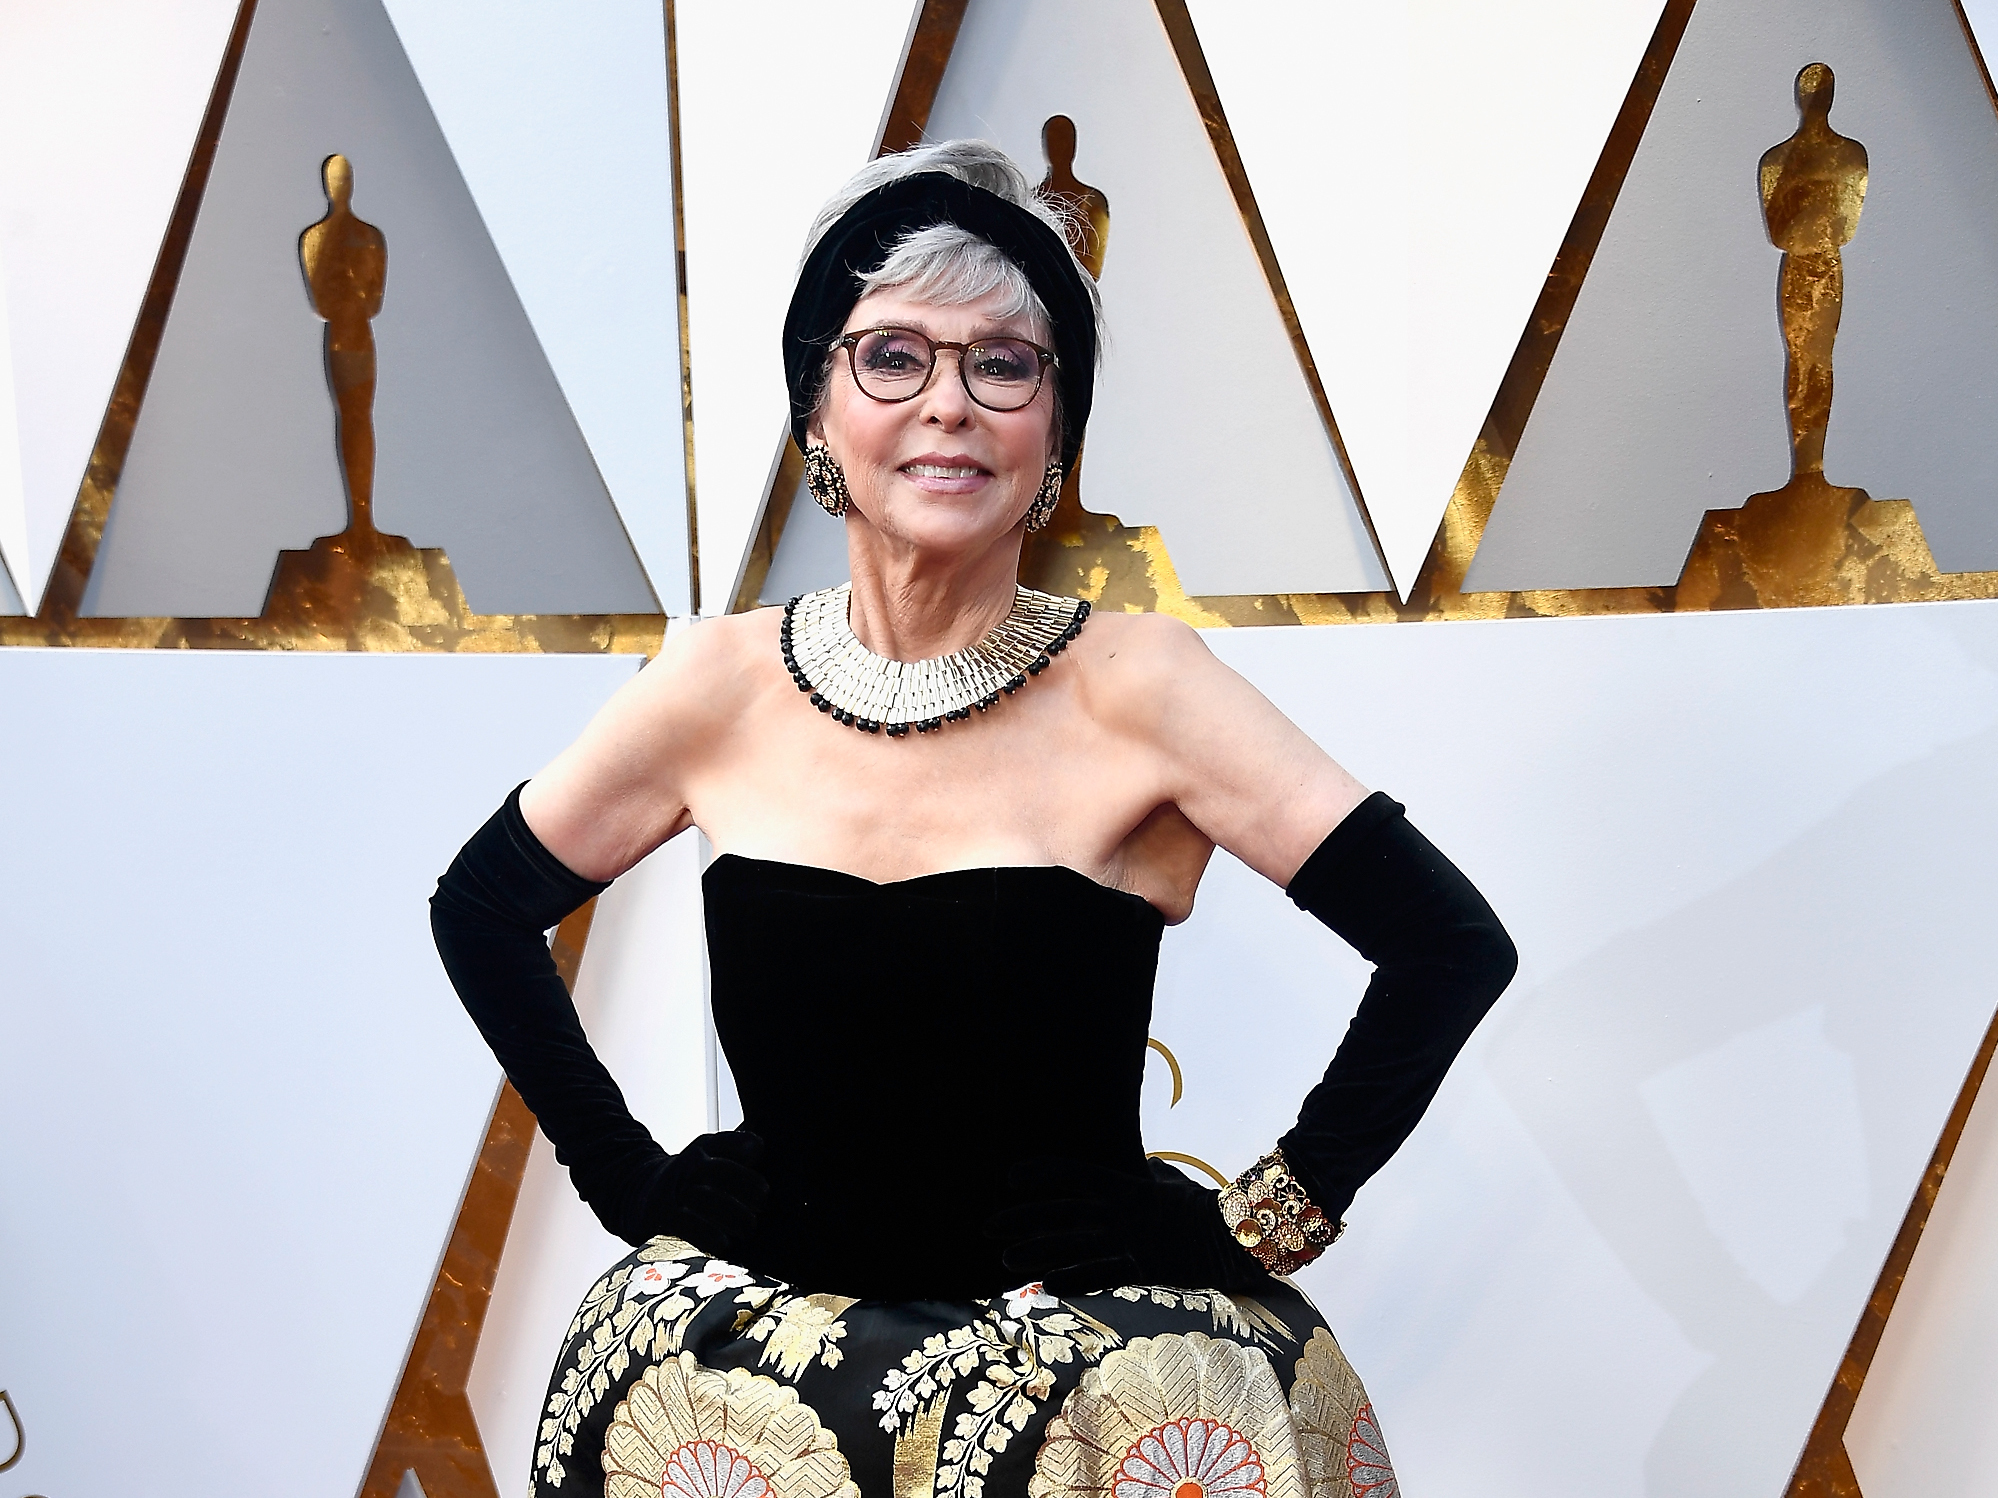 Rita Moreno to 'my gente': Be proud of who you are, and don't give up